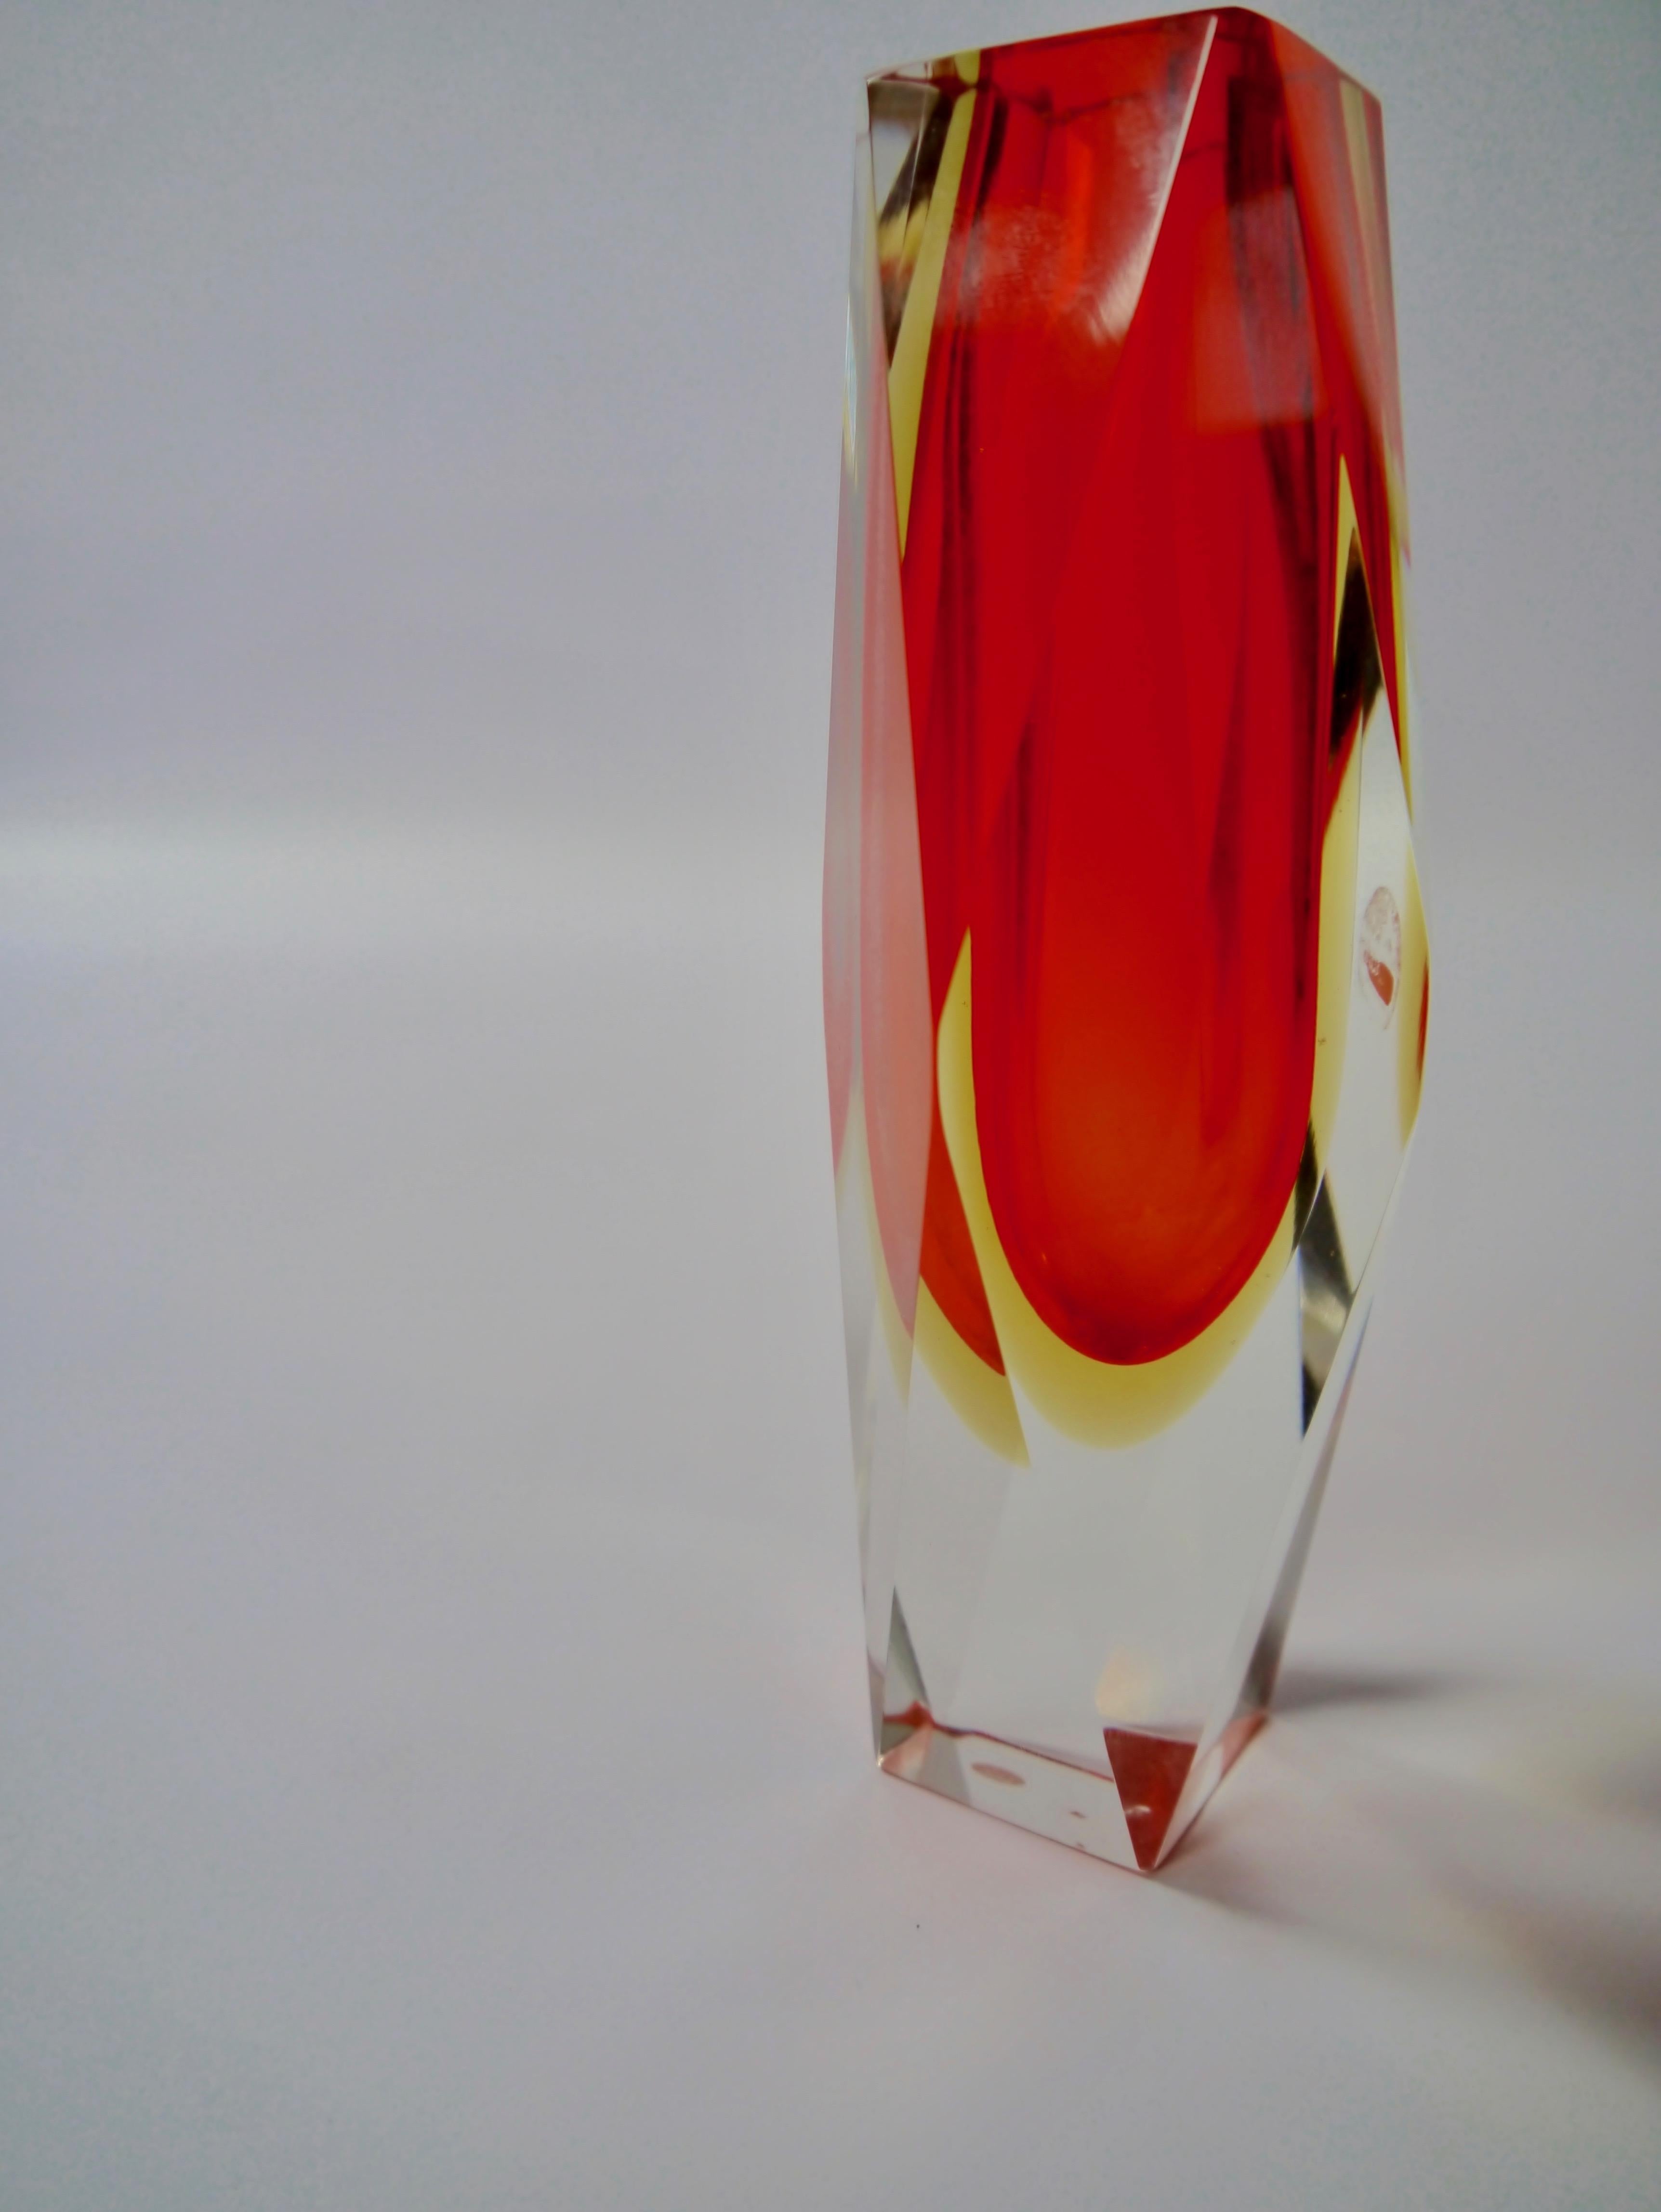 Ruby Red Murano Glass Vase by Mandruzzato for Oball, Italy, 1970s For Sale 1